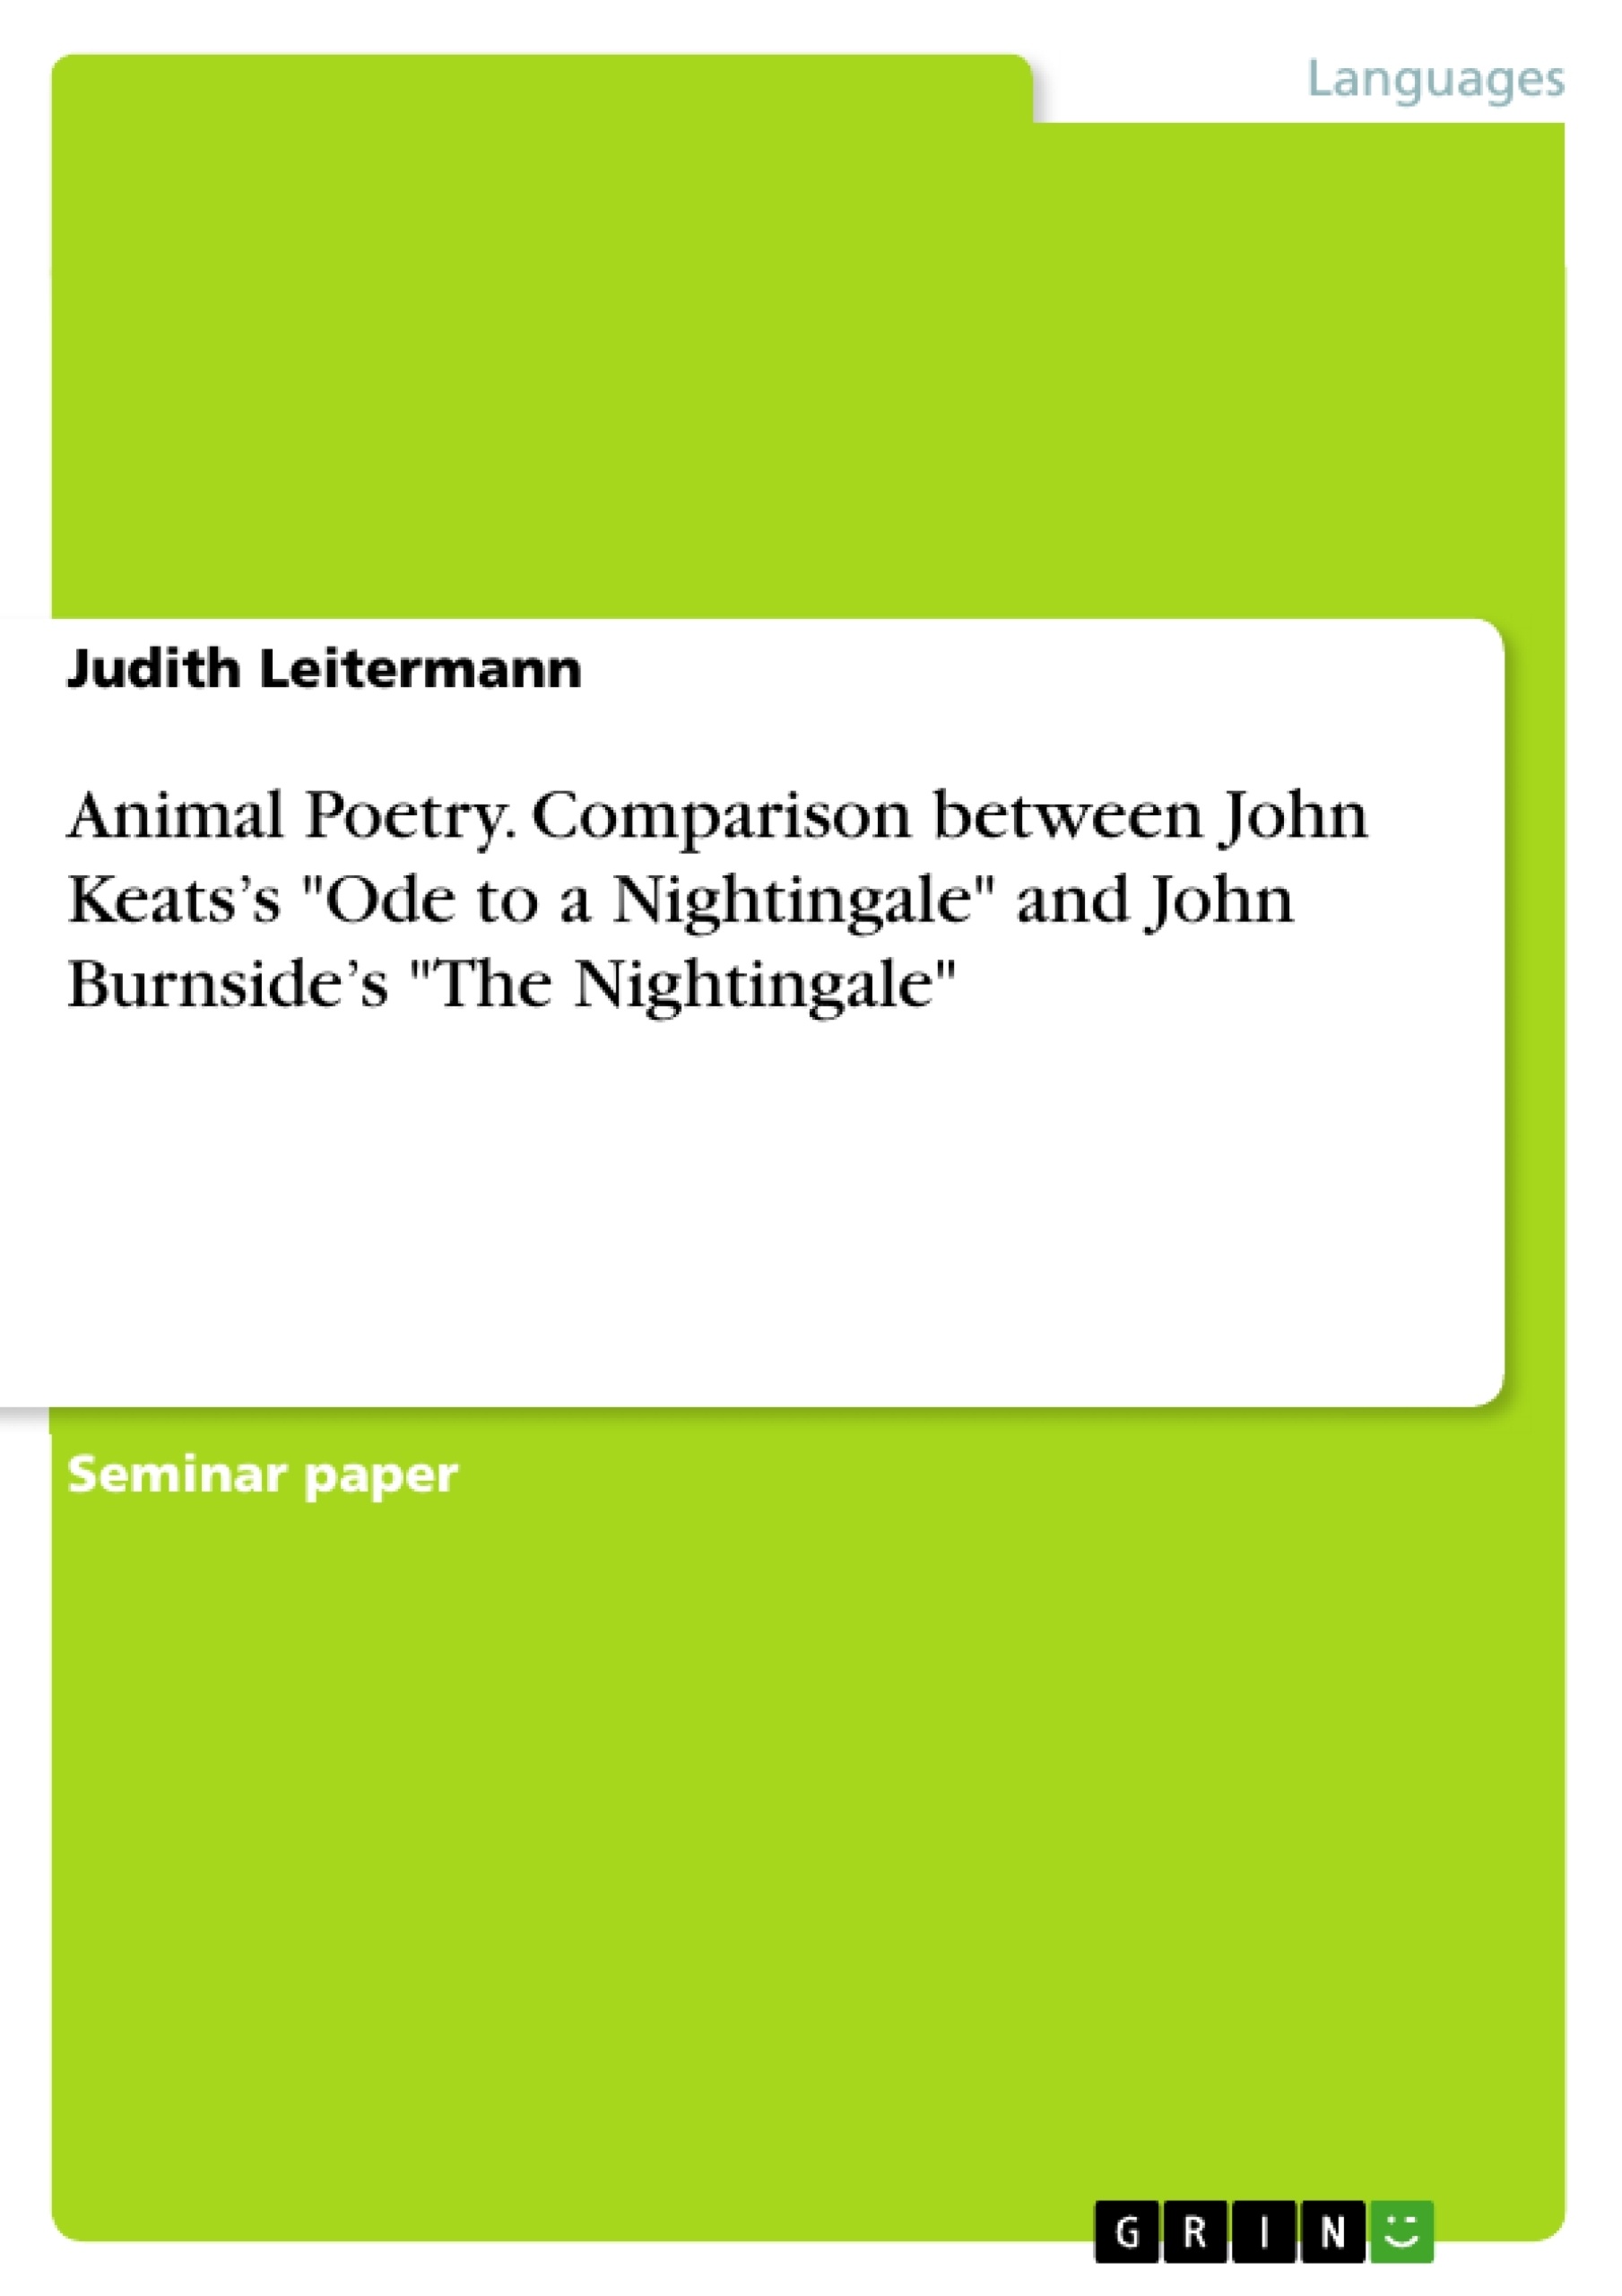 Título: Animal Poetry. Comparison between John Keats’s "Ode to a Nightingale" and John Burnside’s "The Nightingale"